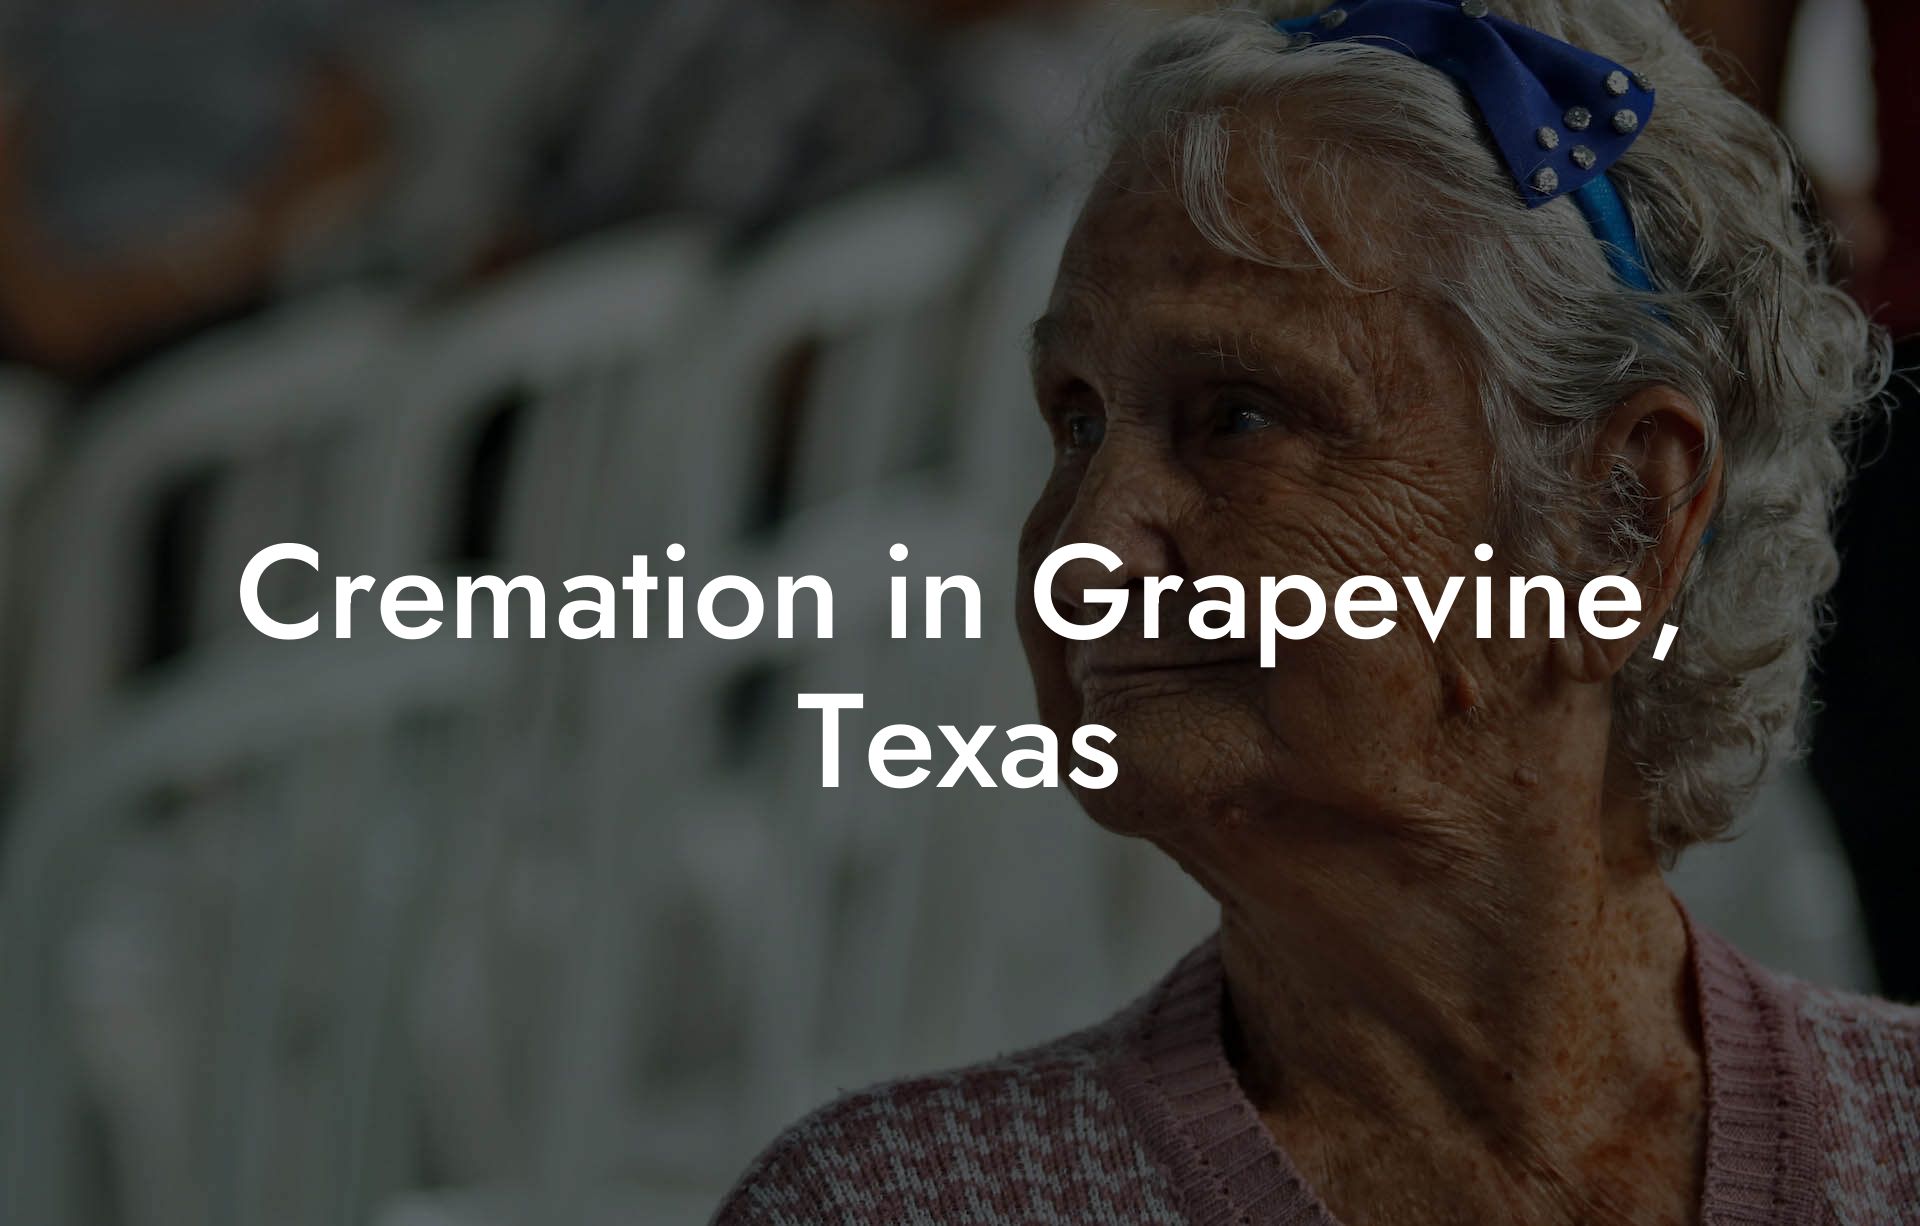 Cremation in Grapevine, Texas